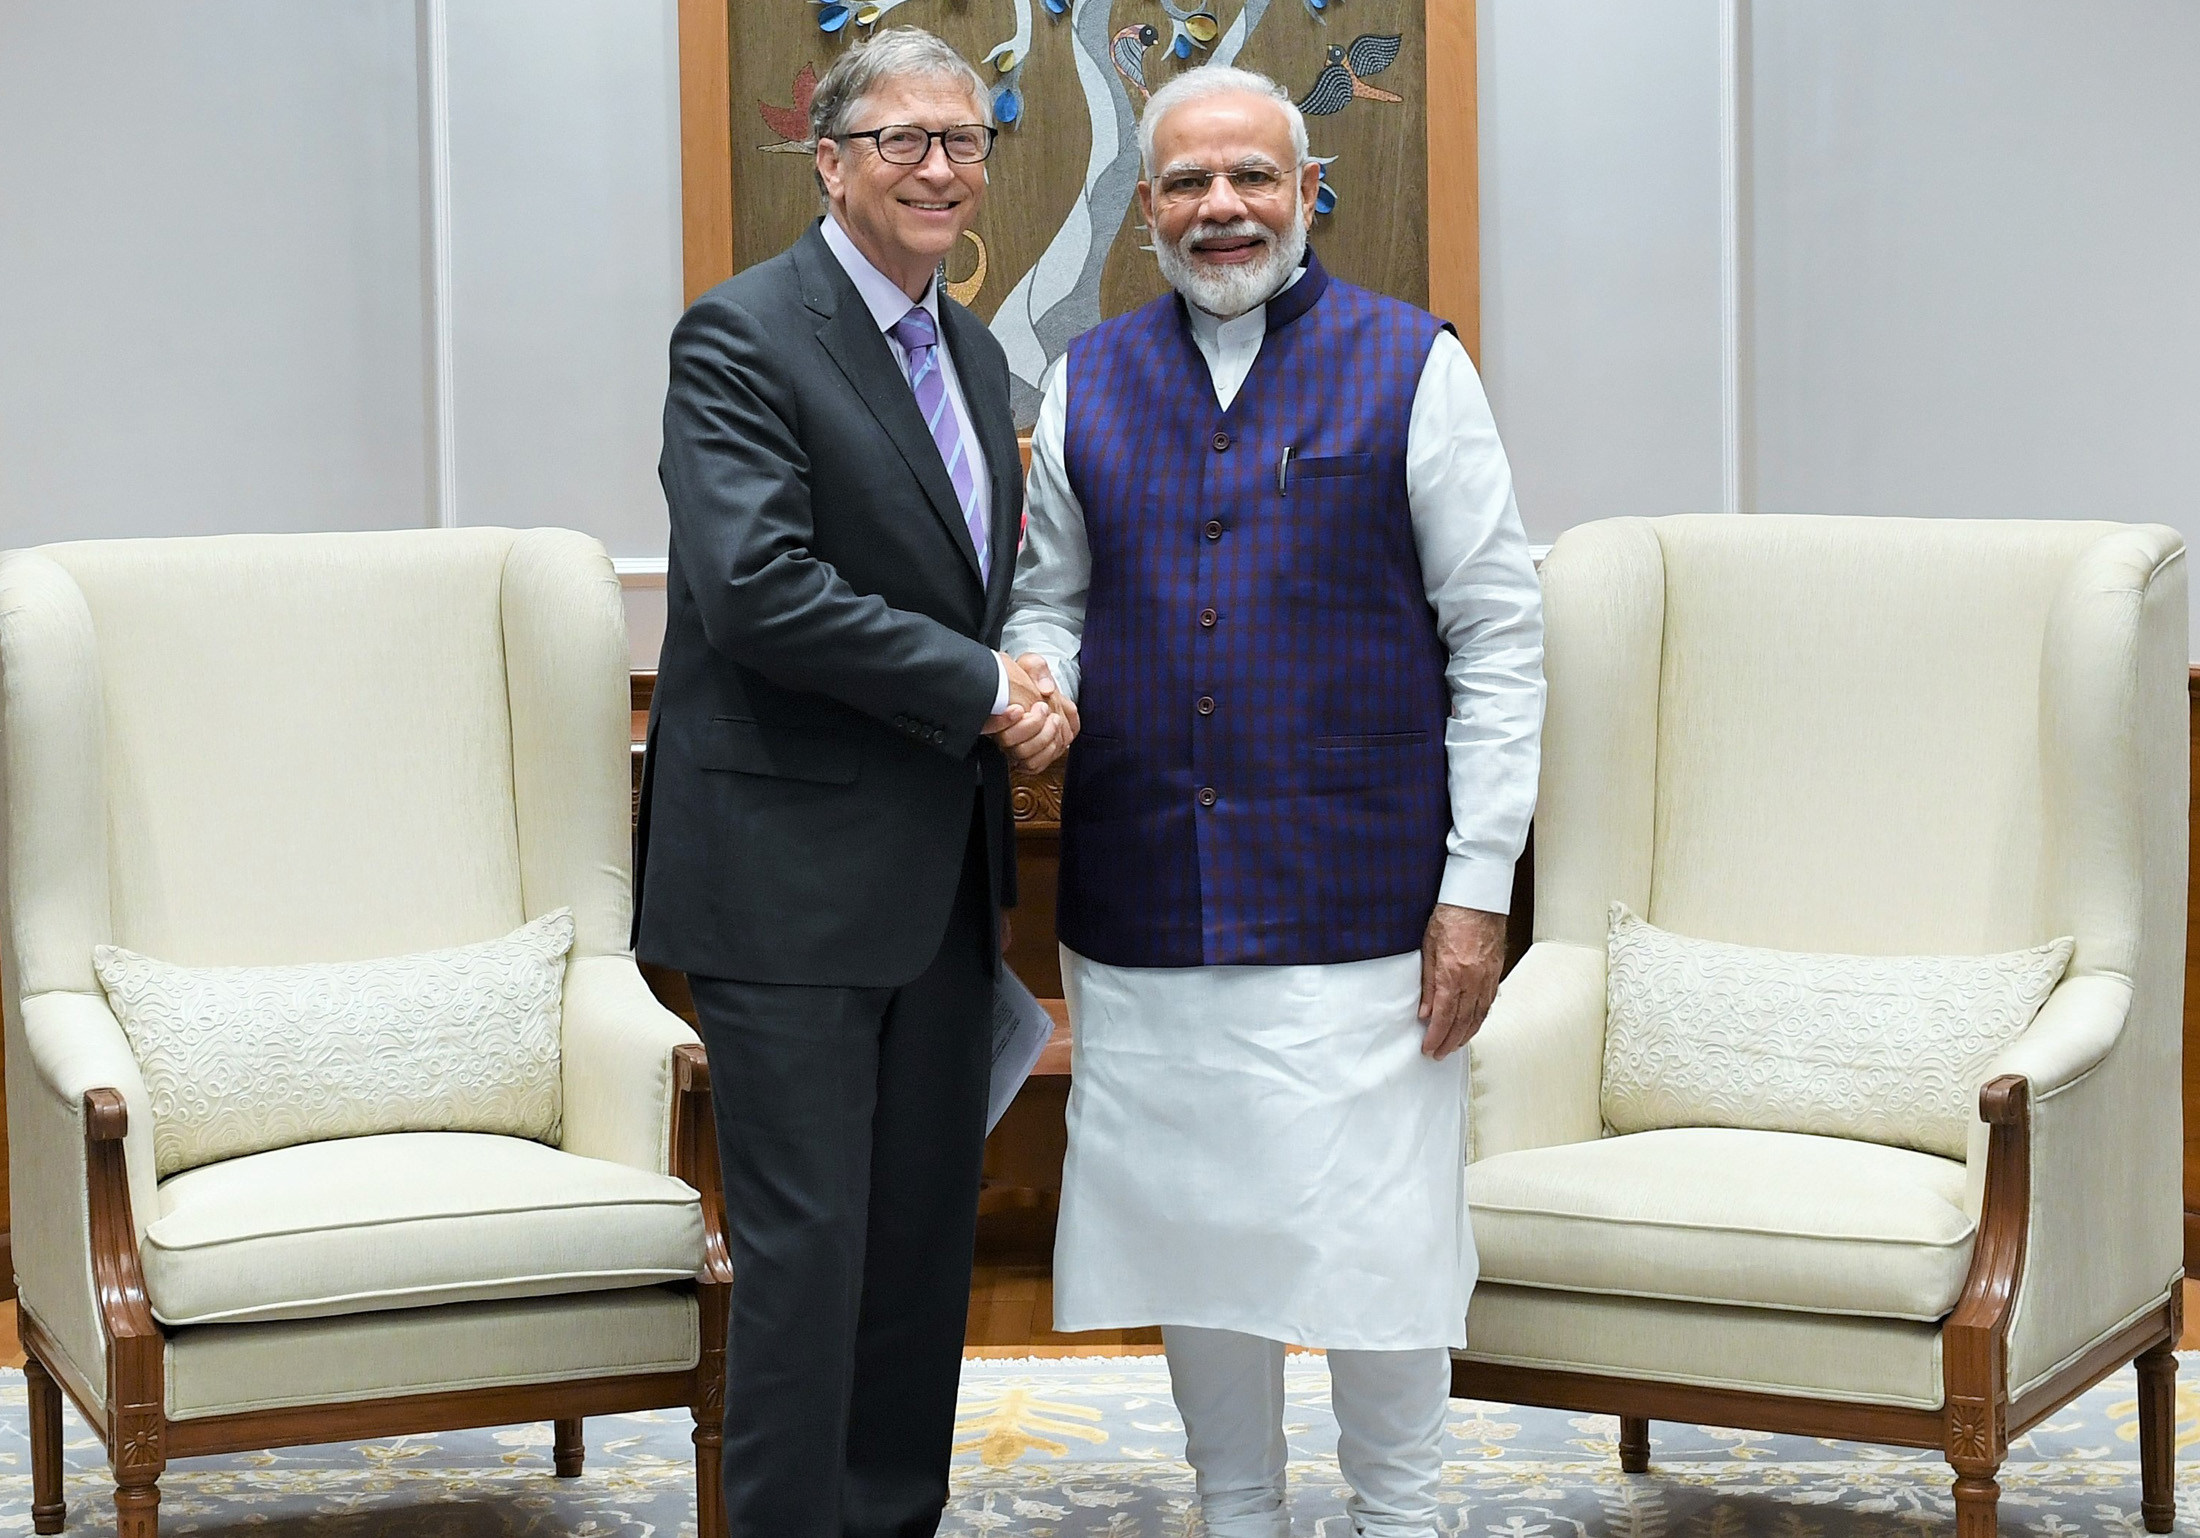 PM Modi-Bill Gates in freewheeling chat, AI and climate change discussed